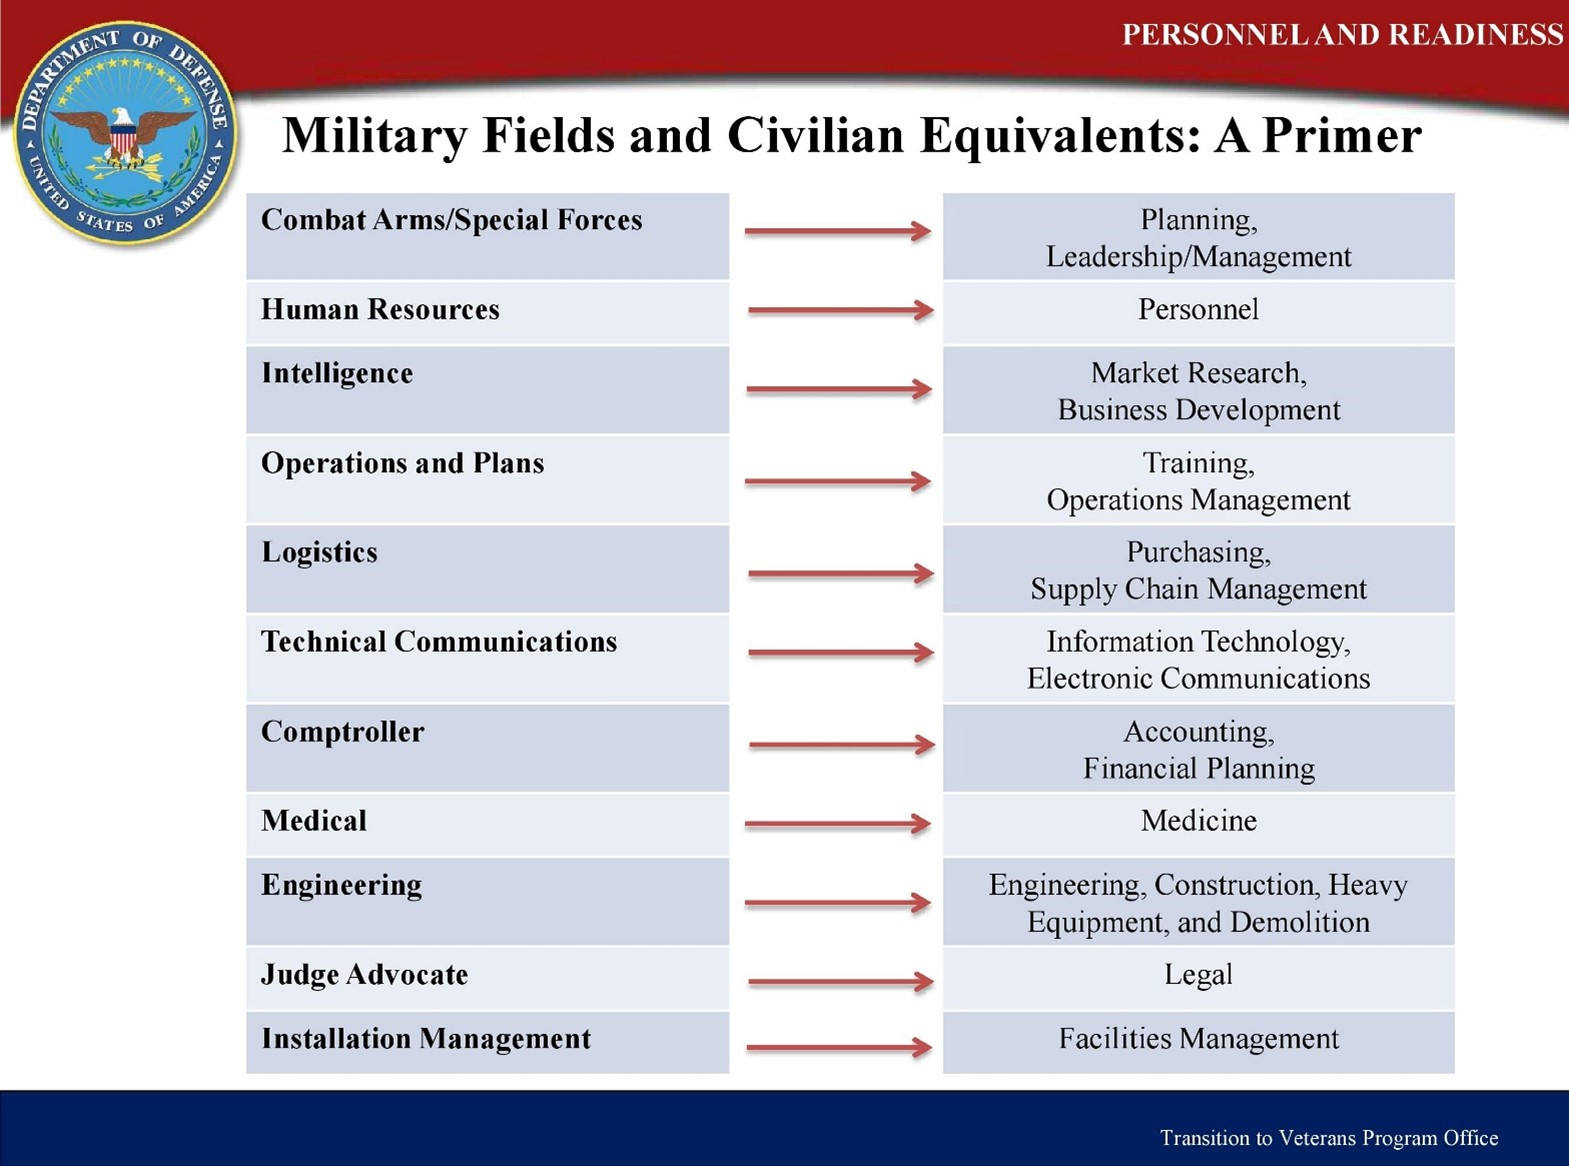 Screenshot of Military Fileds and Civilian Equivalents